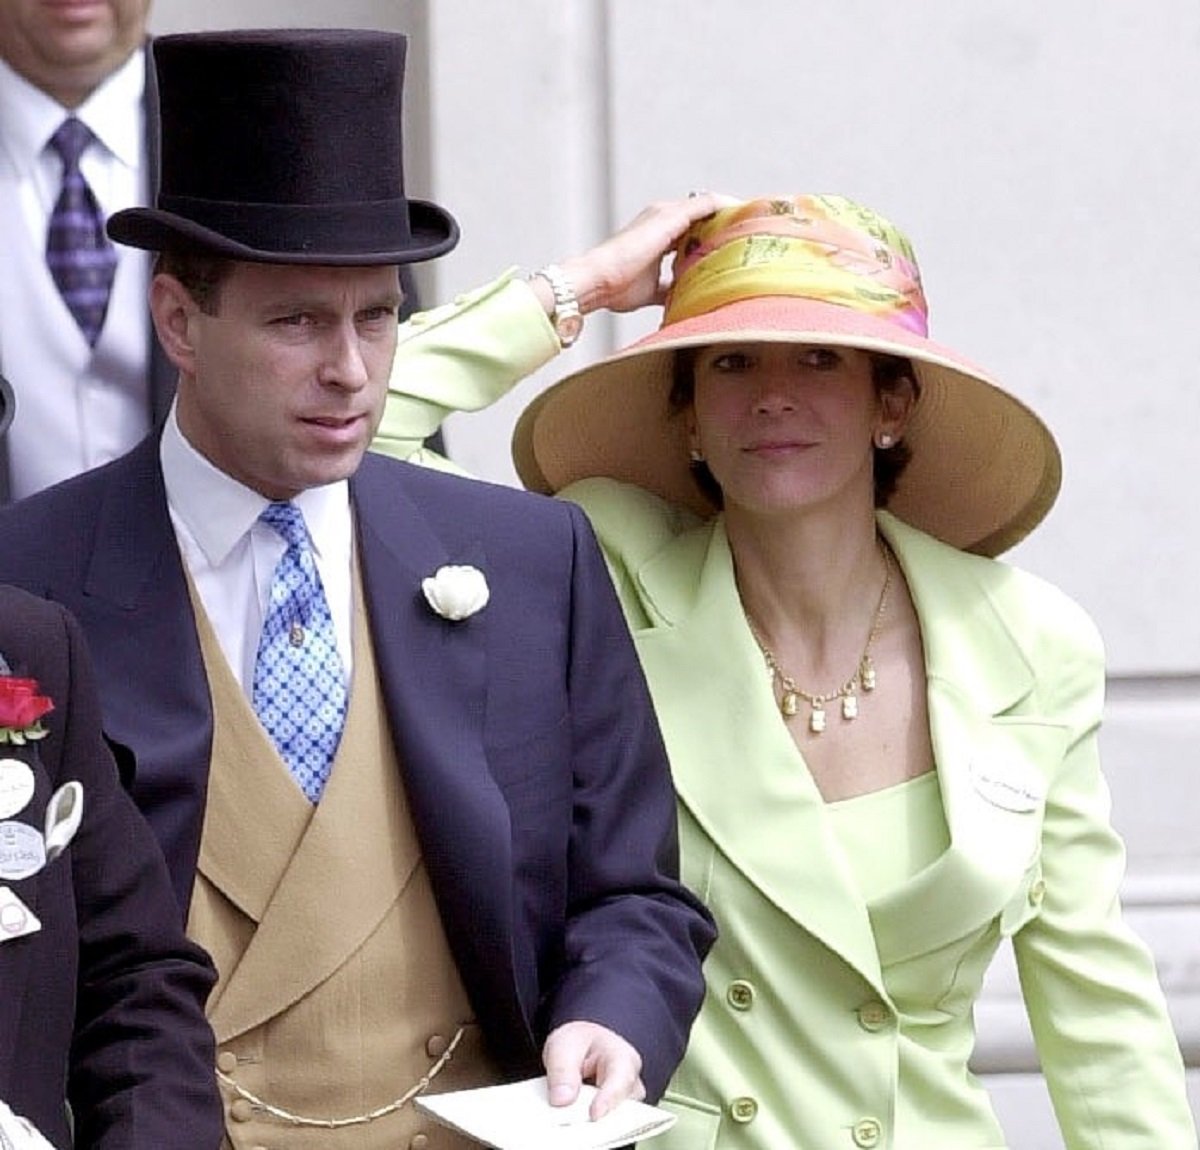 Prince Andrew and Ghislaine Maxwell attend Royal Ascot in 2000